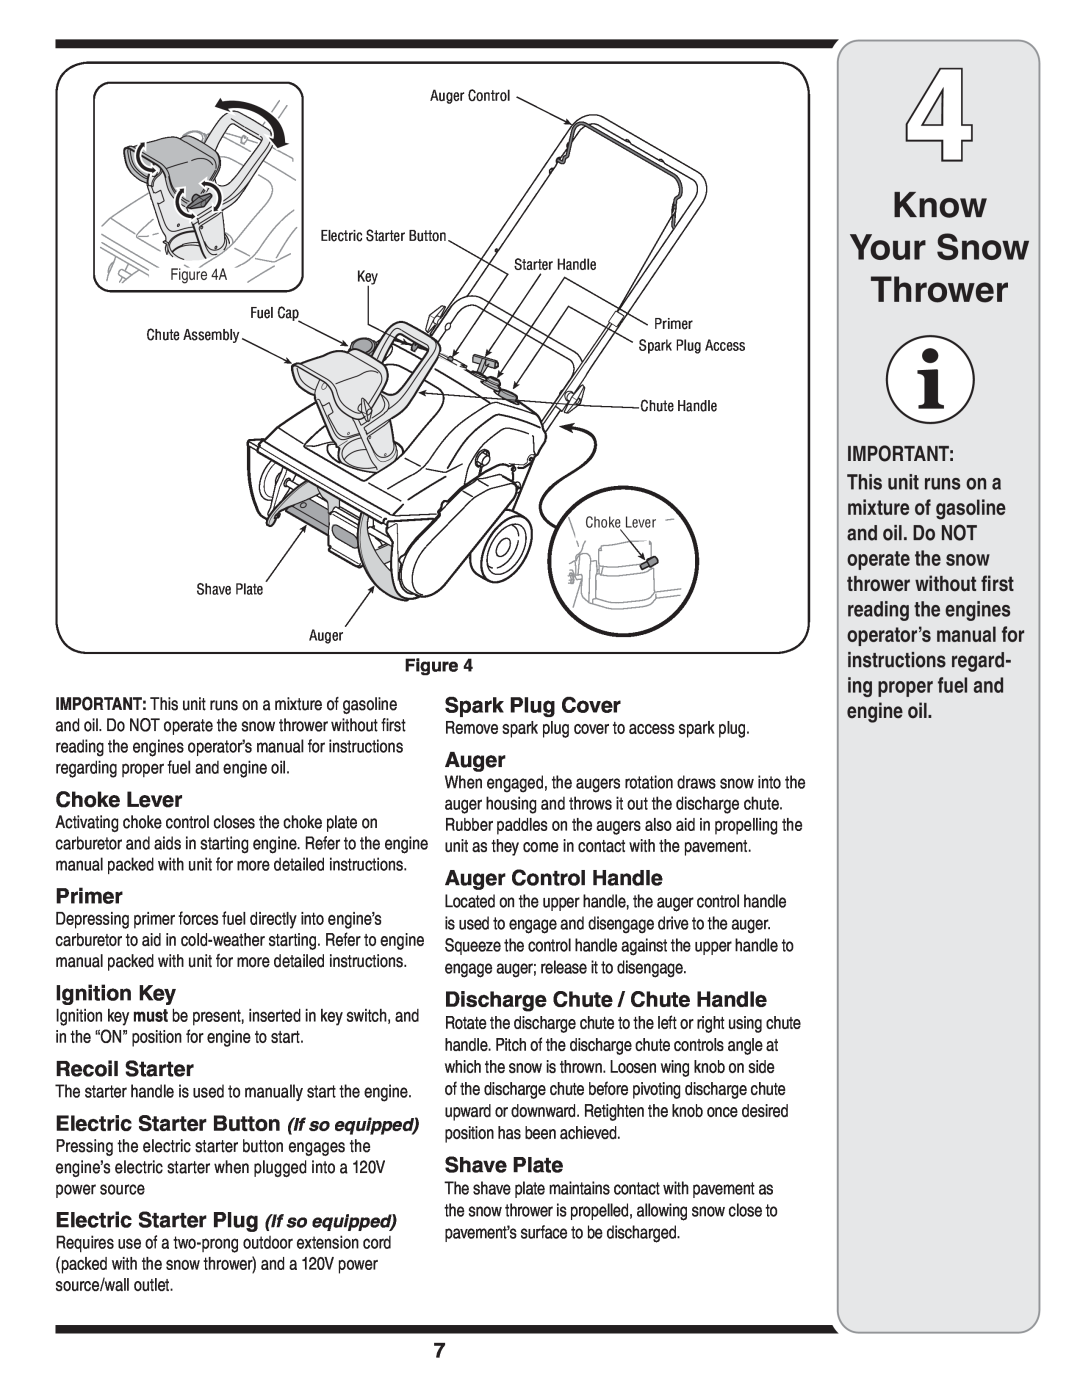 MTD S261, S240, S230, S250, S260 warranty Know Your Snow Thrower 